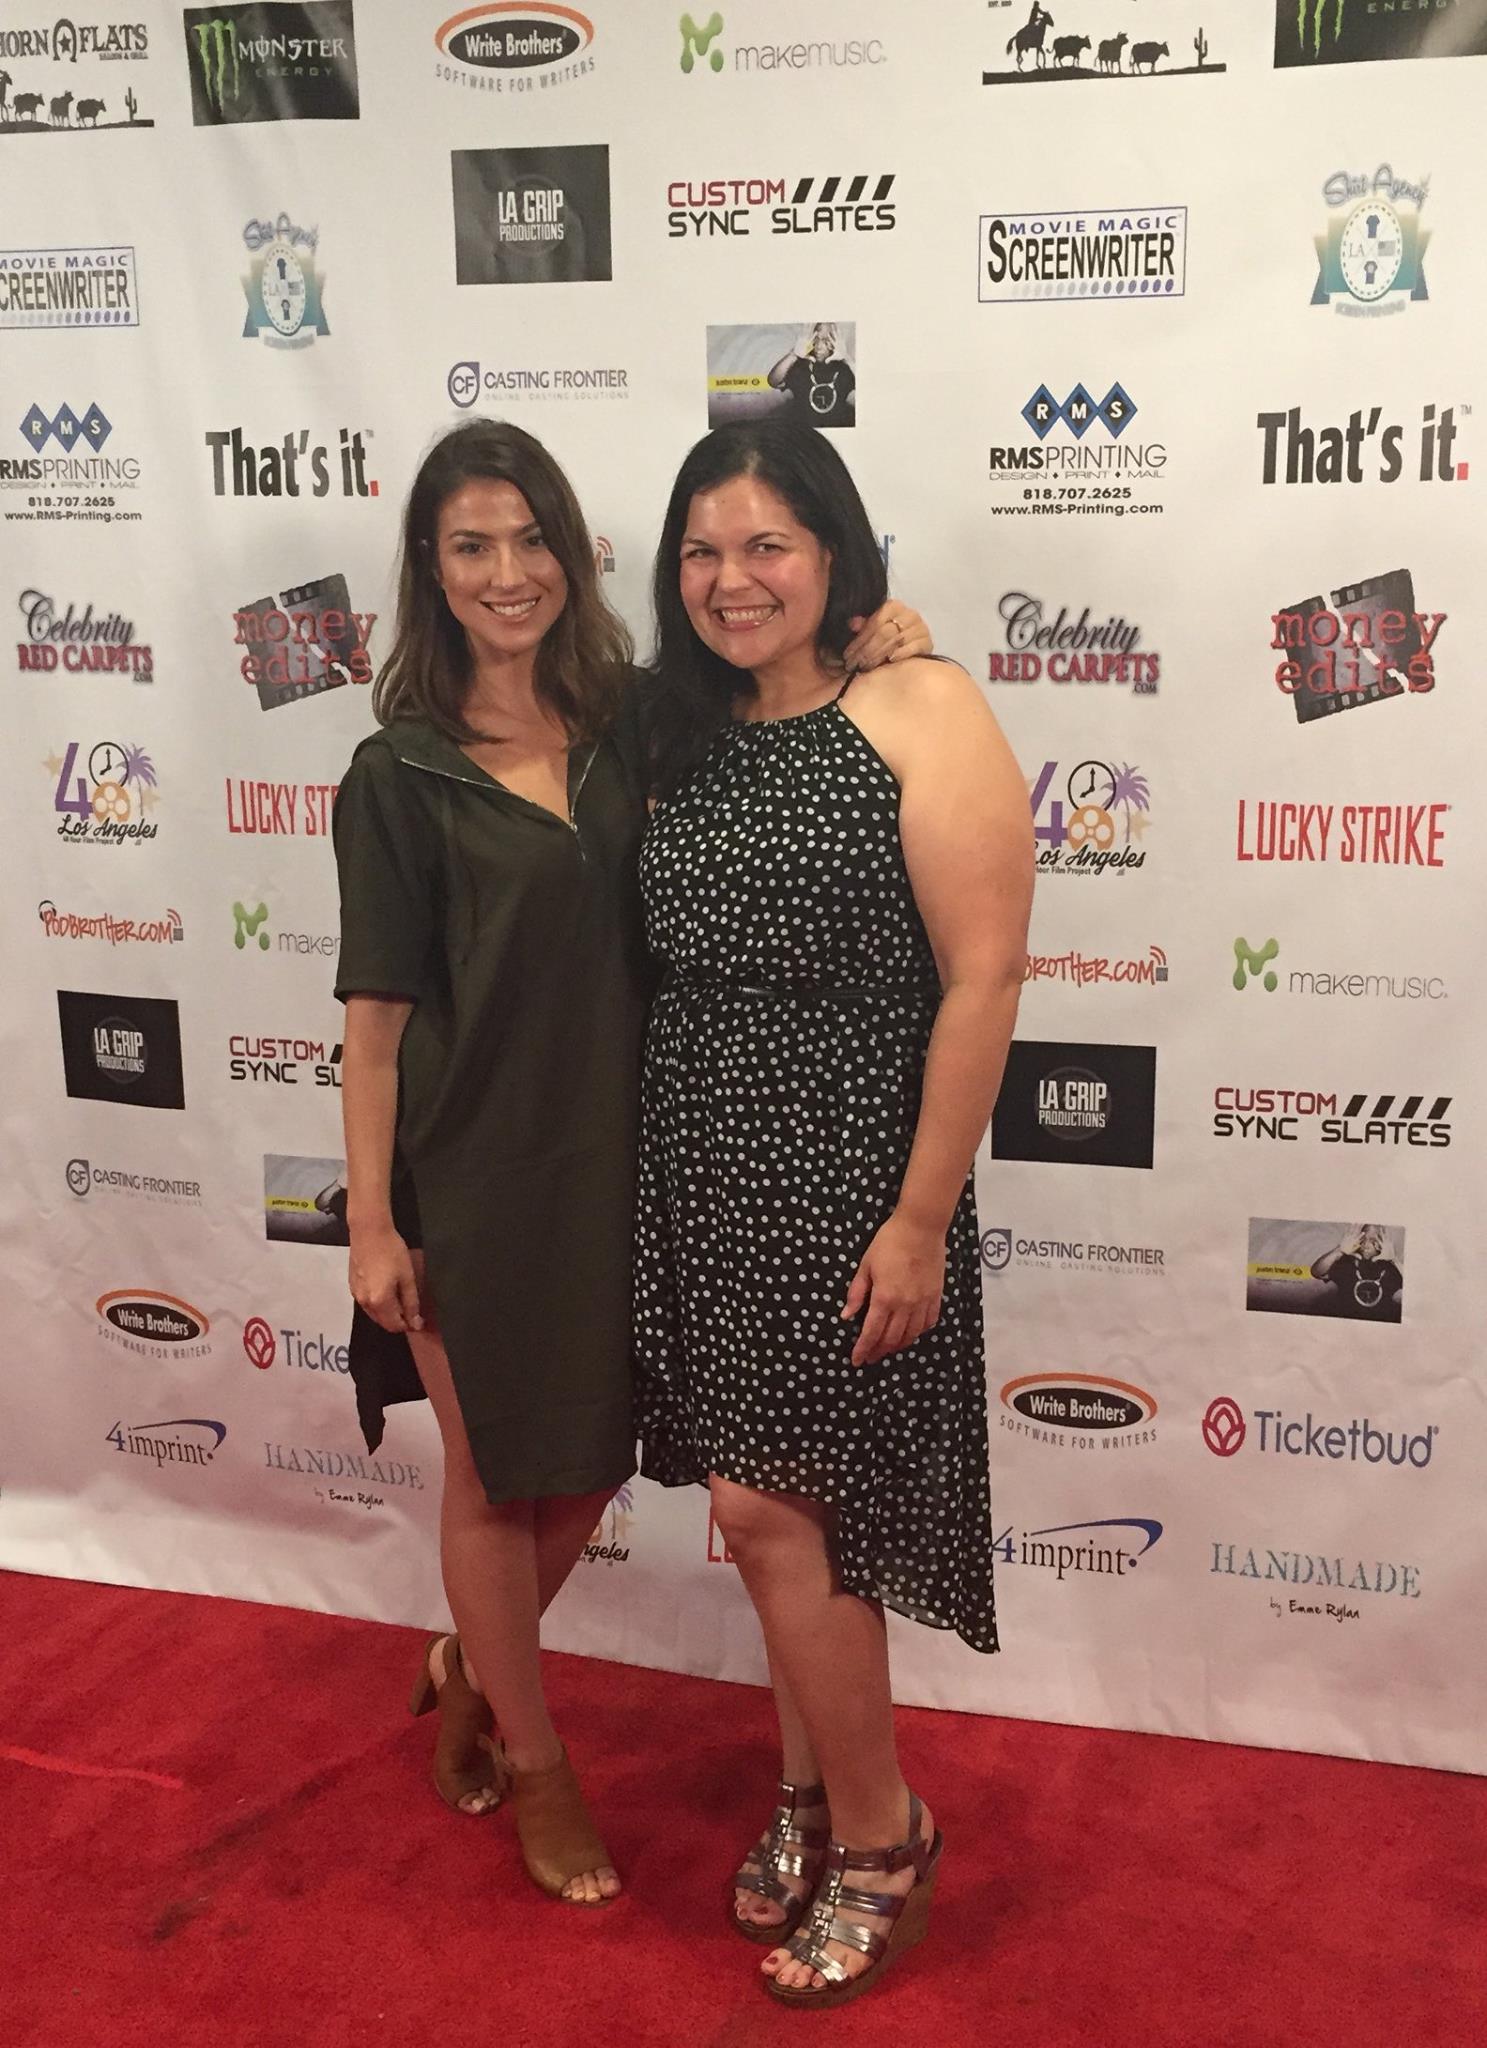 Josephine Leffner and Kathryn Faith at the 48 Hour Film Project screening of 